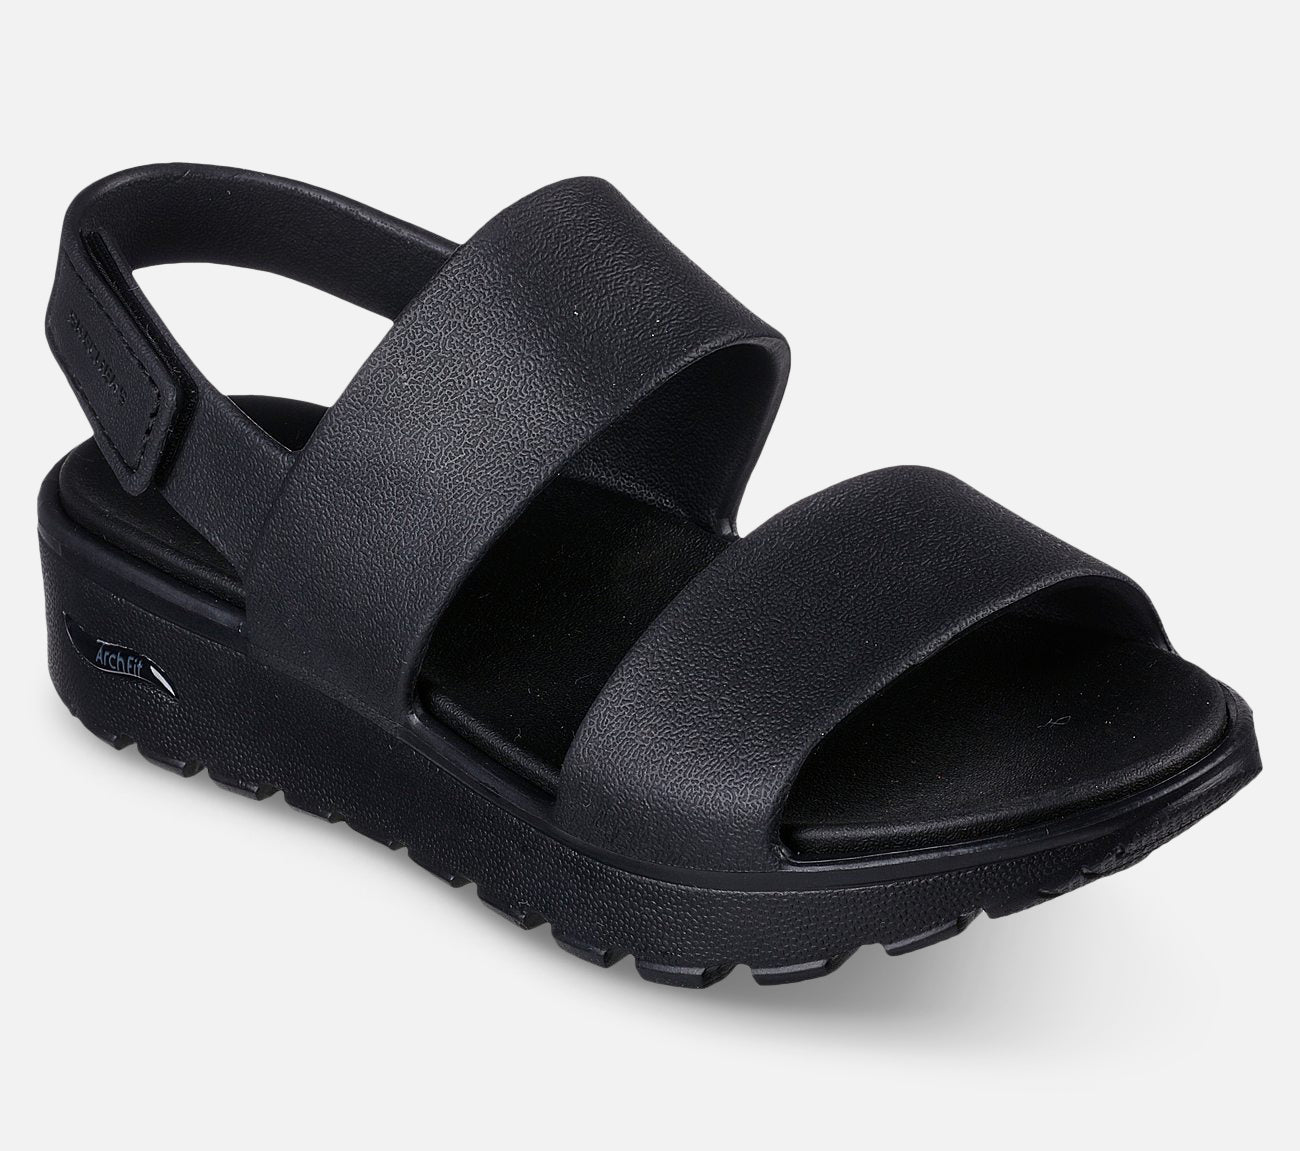 Arch Fit Footsteps - Day Dream Sandal Skechers